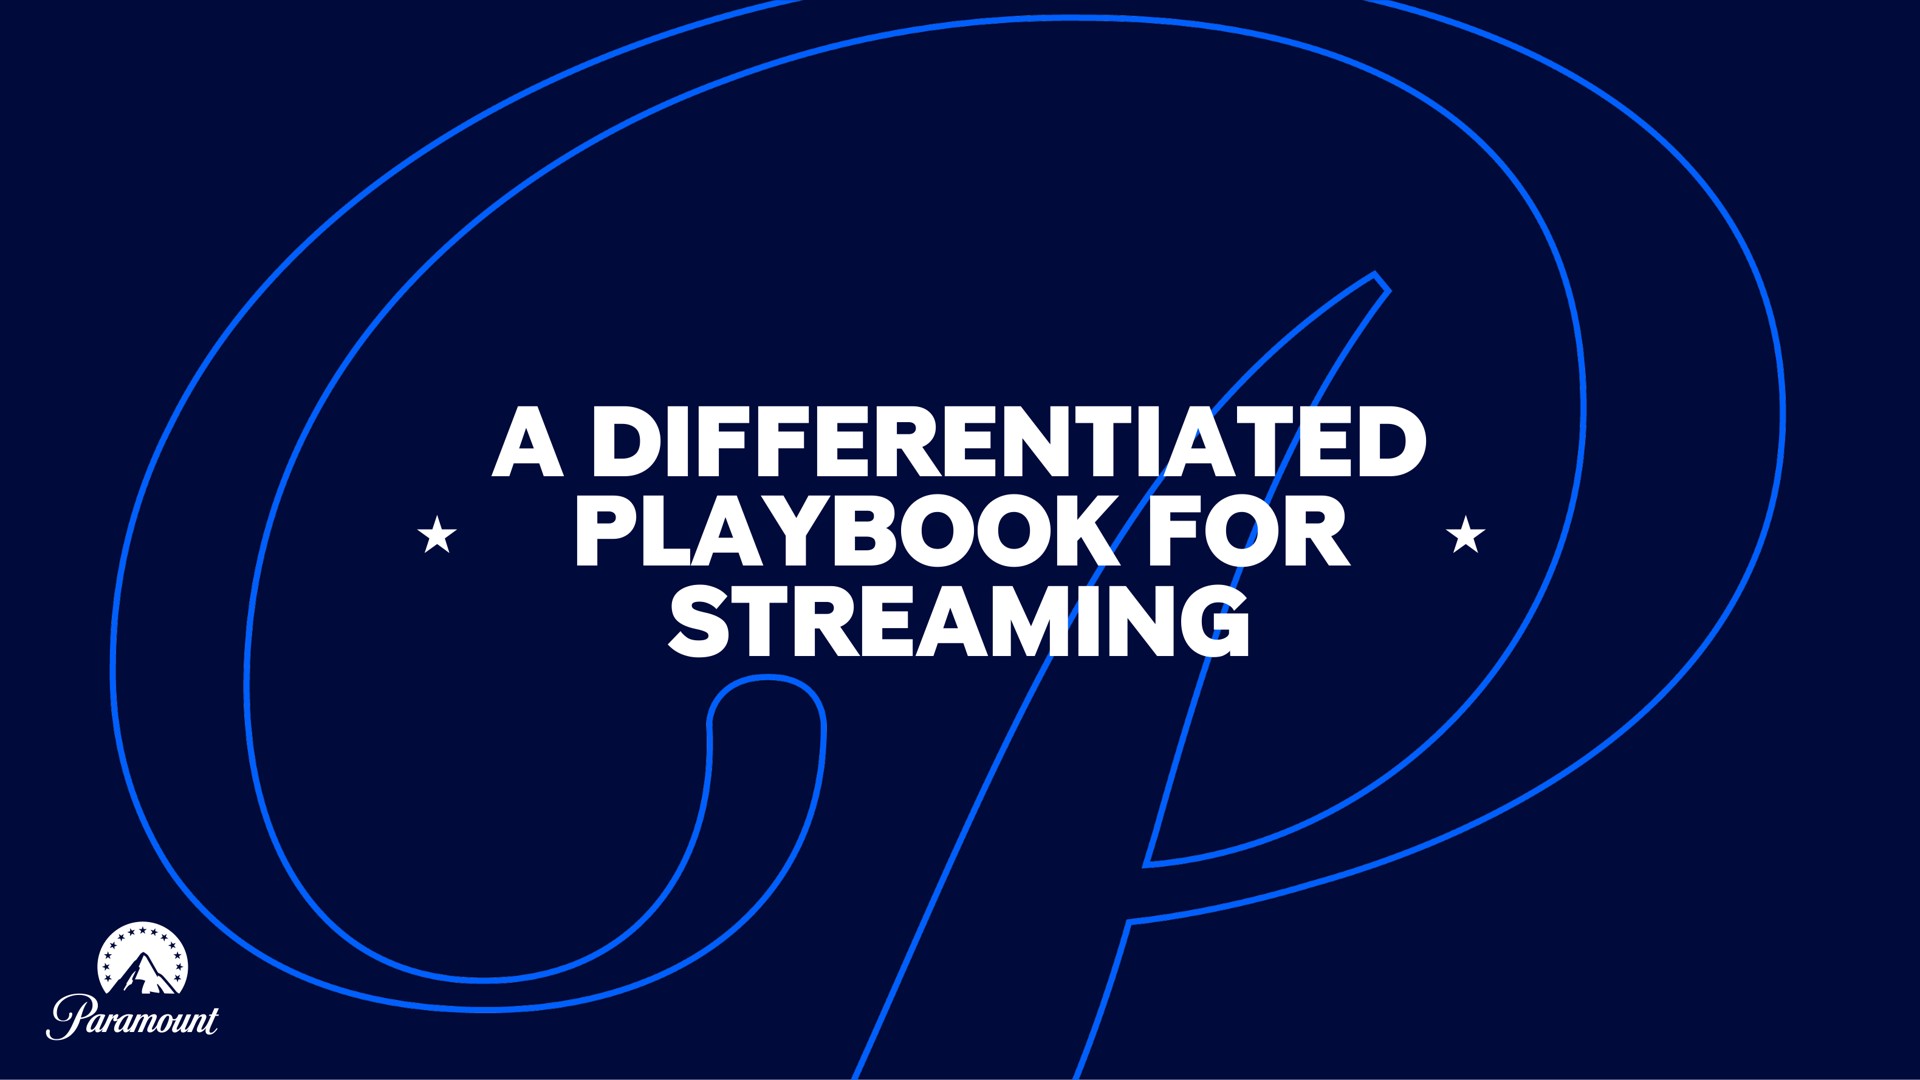 a differentiated playbook for streaming | Paramount